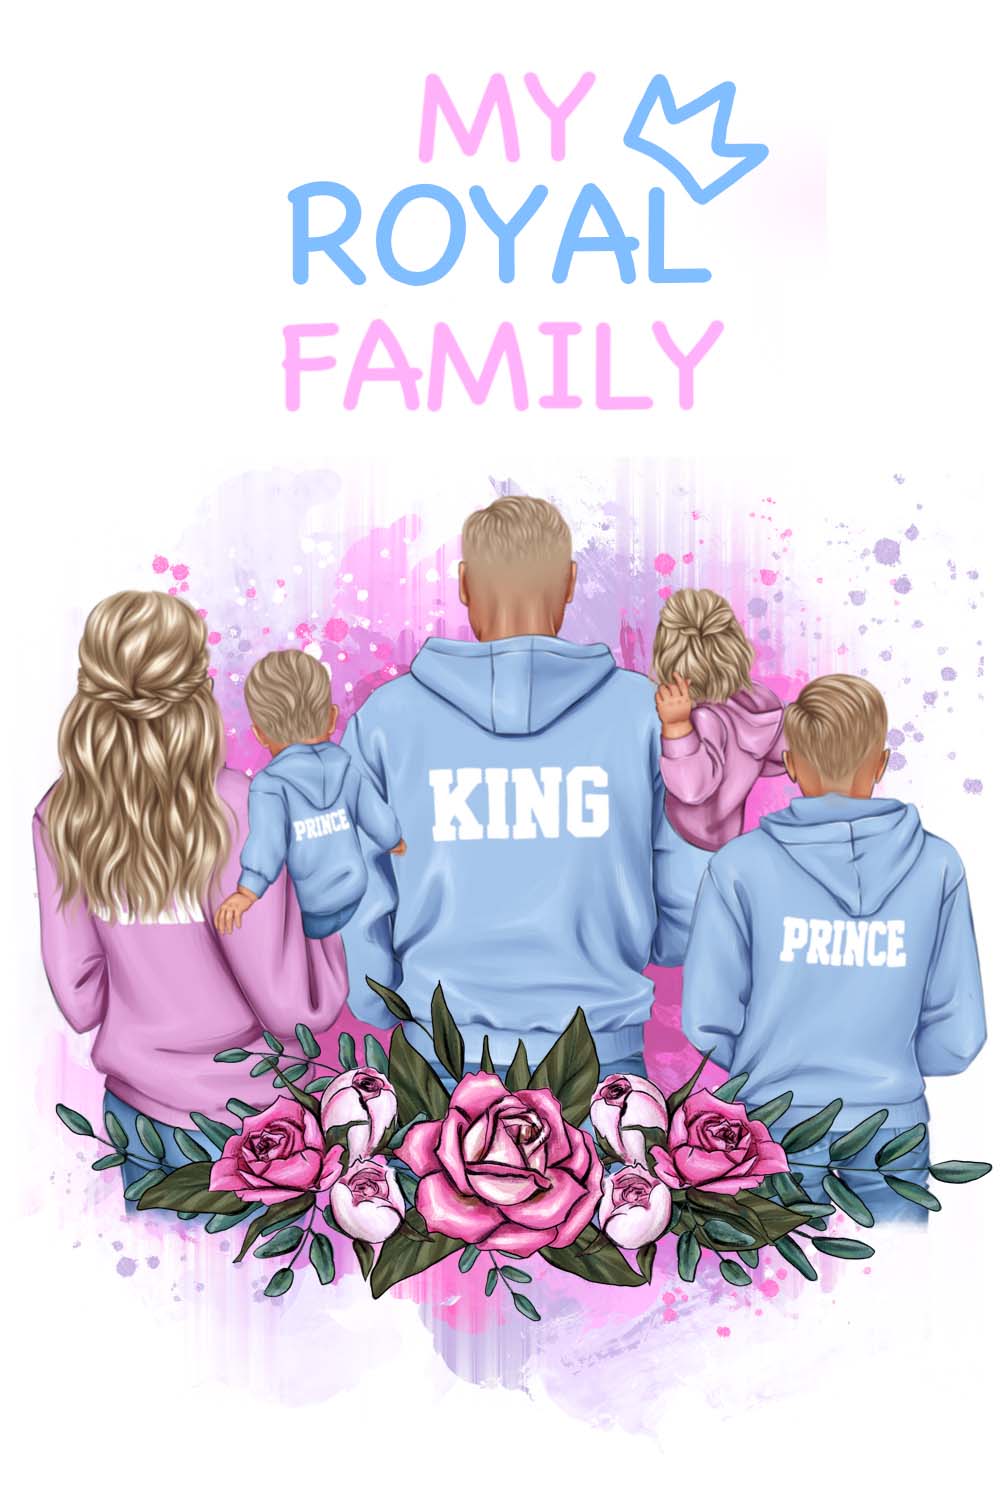 Family Clipart Dad And Kids Pinterest Image.